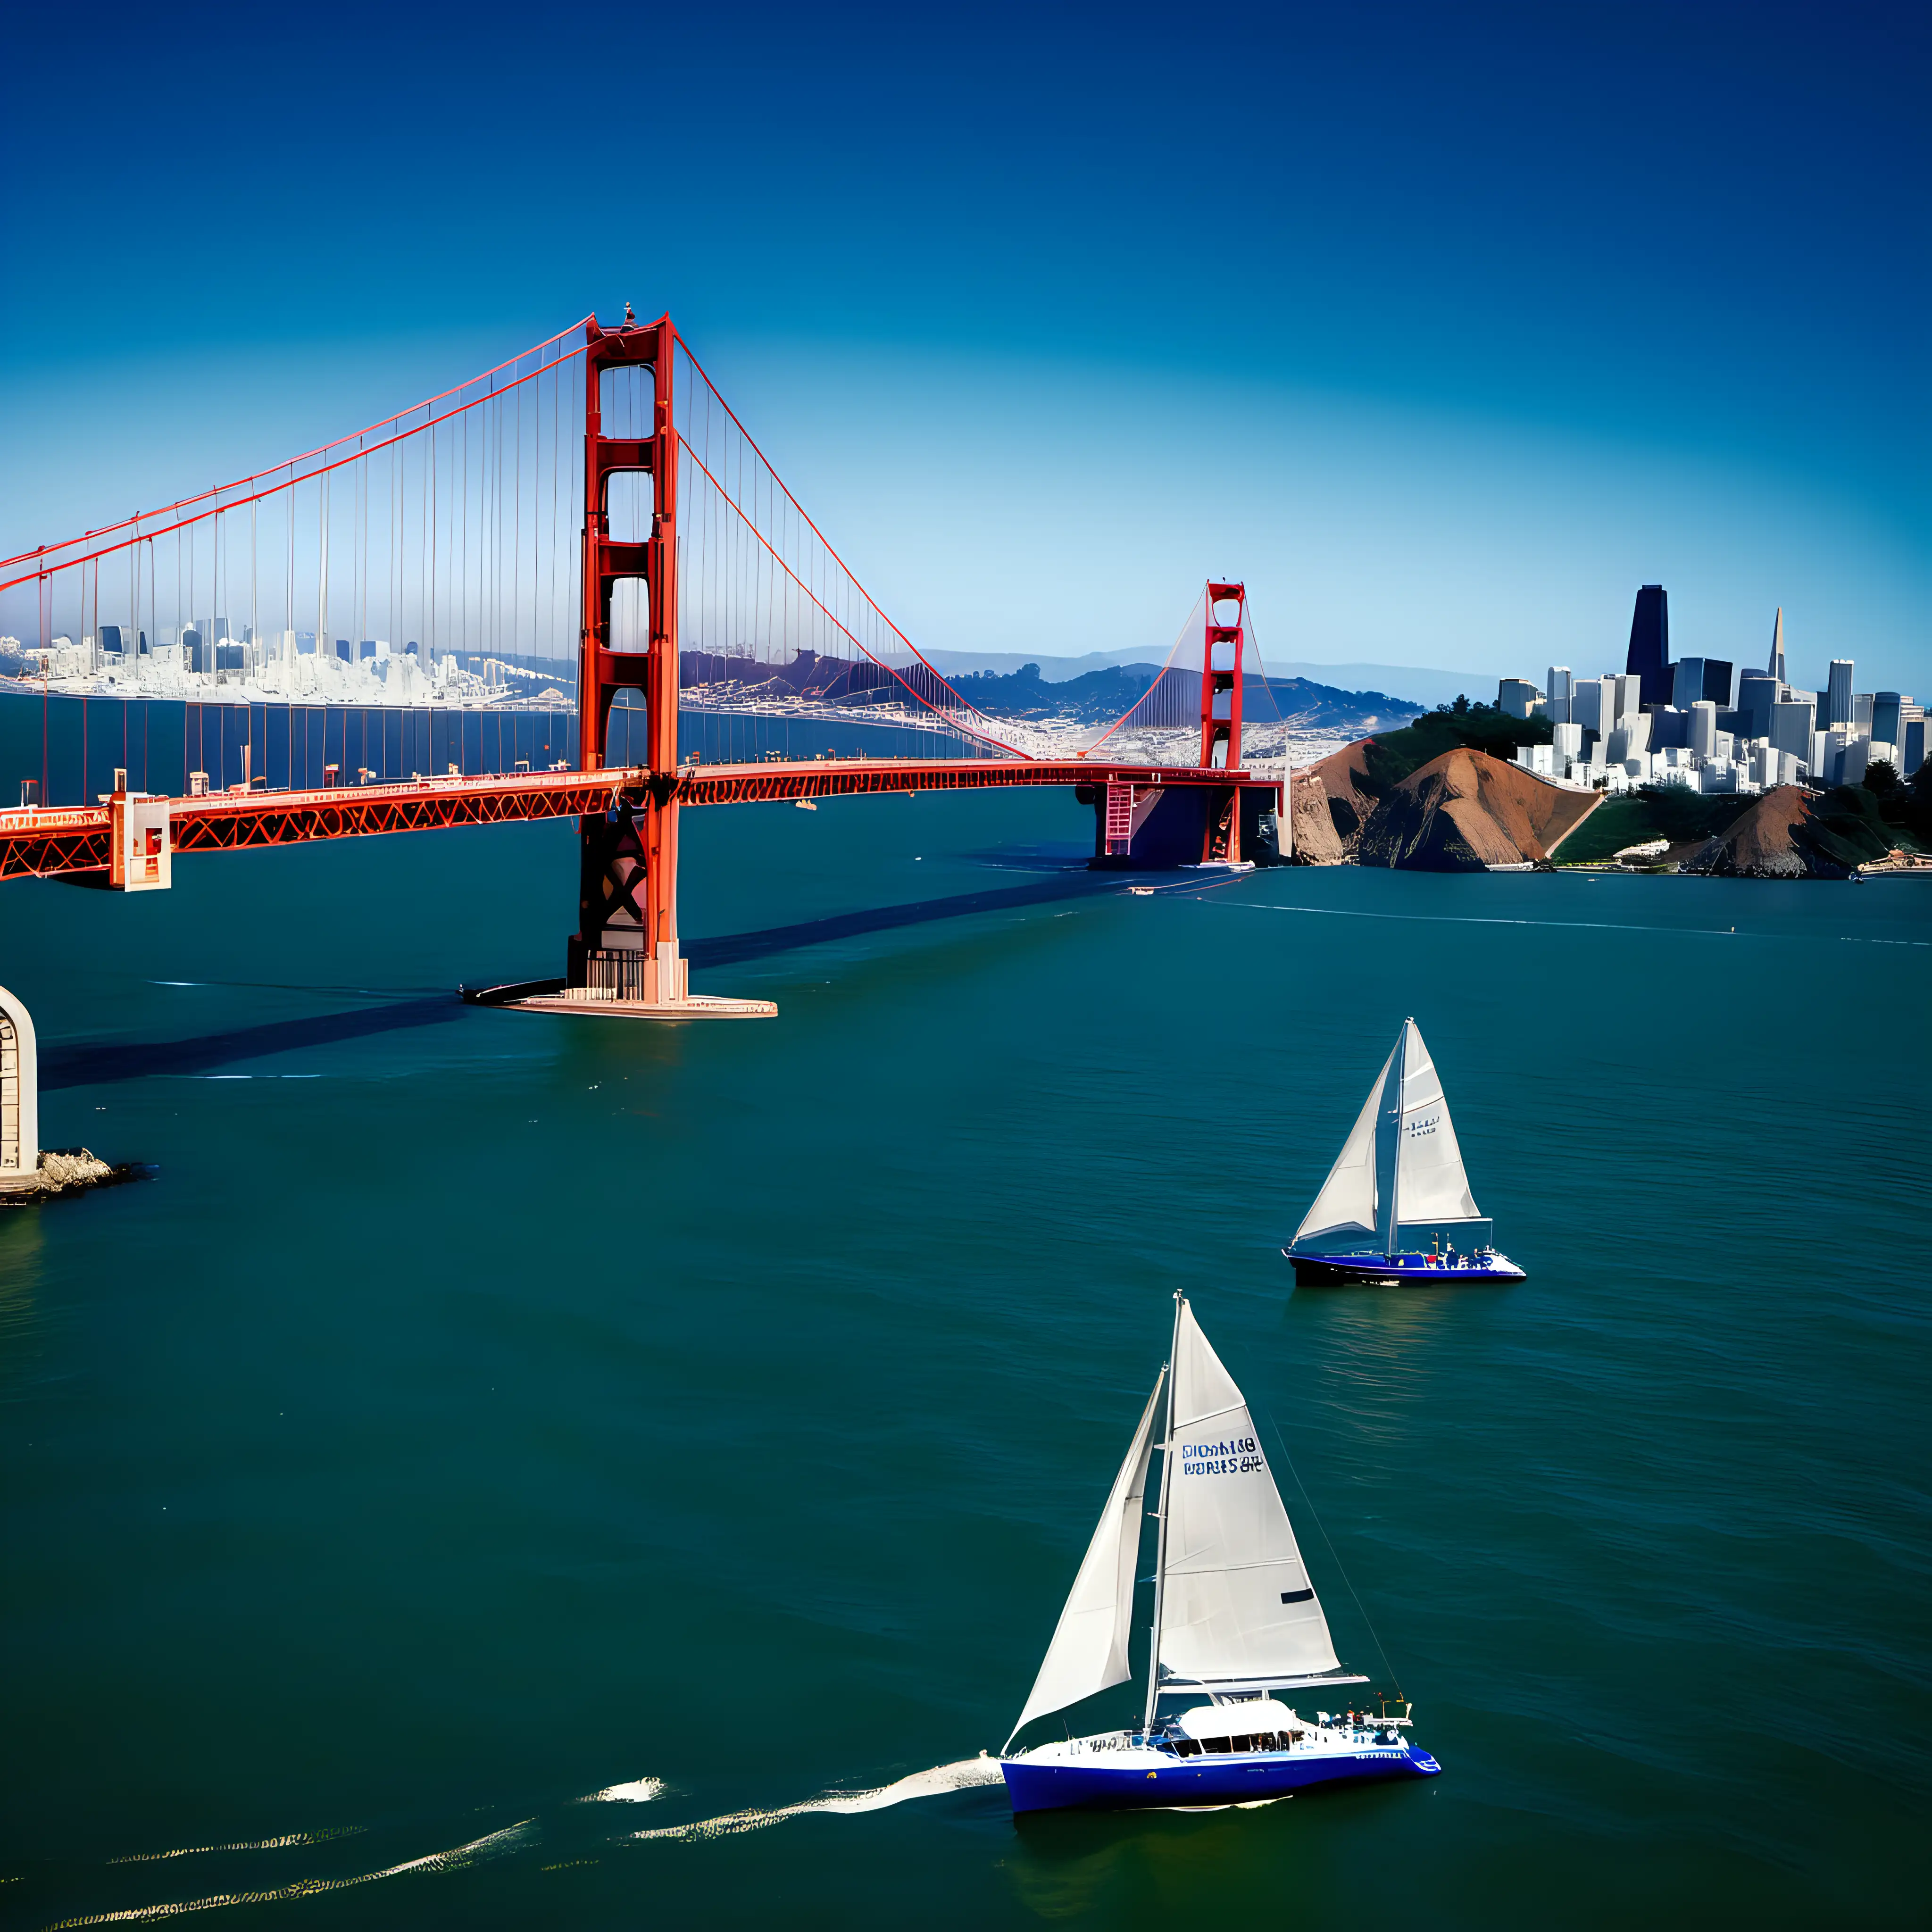 San Francisco Golden Gate Bridge with the the city of San Francisco in the background, fourground has one small sailboat in rich deep blue water, sky is a bright blue and a  cloudless